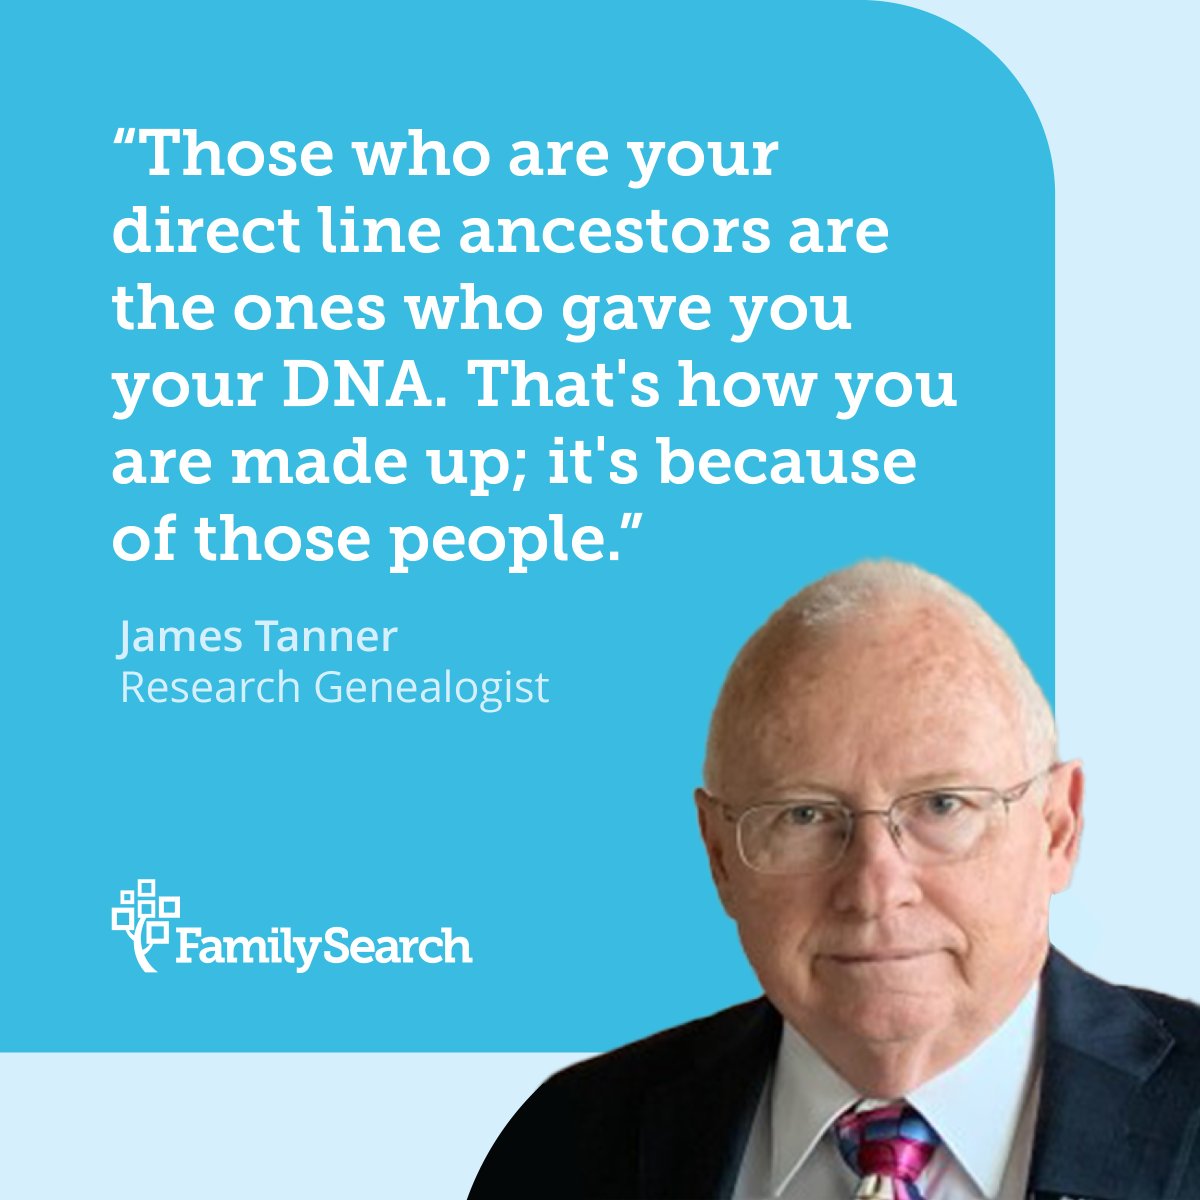 James Tanner’s class “Help for the Absolute Genealogy Beginner” is a must-watch! Whether you’re chatting with relatives, doing a DNA test, or using a genealogy program, dive into your family history journey now.

Watch (cont) spr.ly/l/6018bTQig